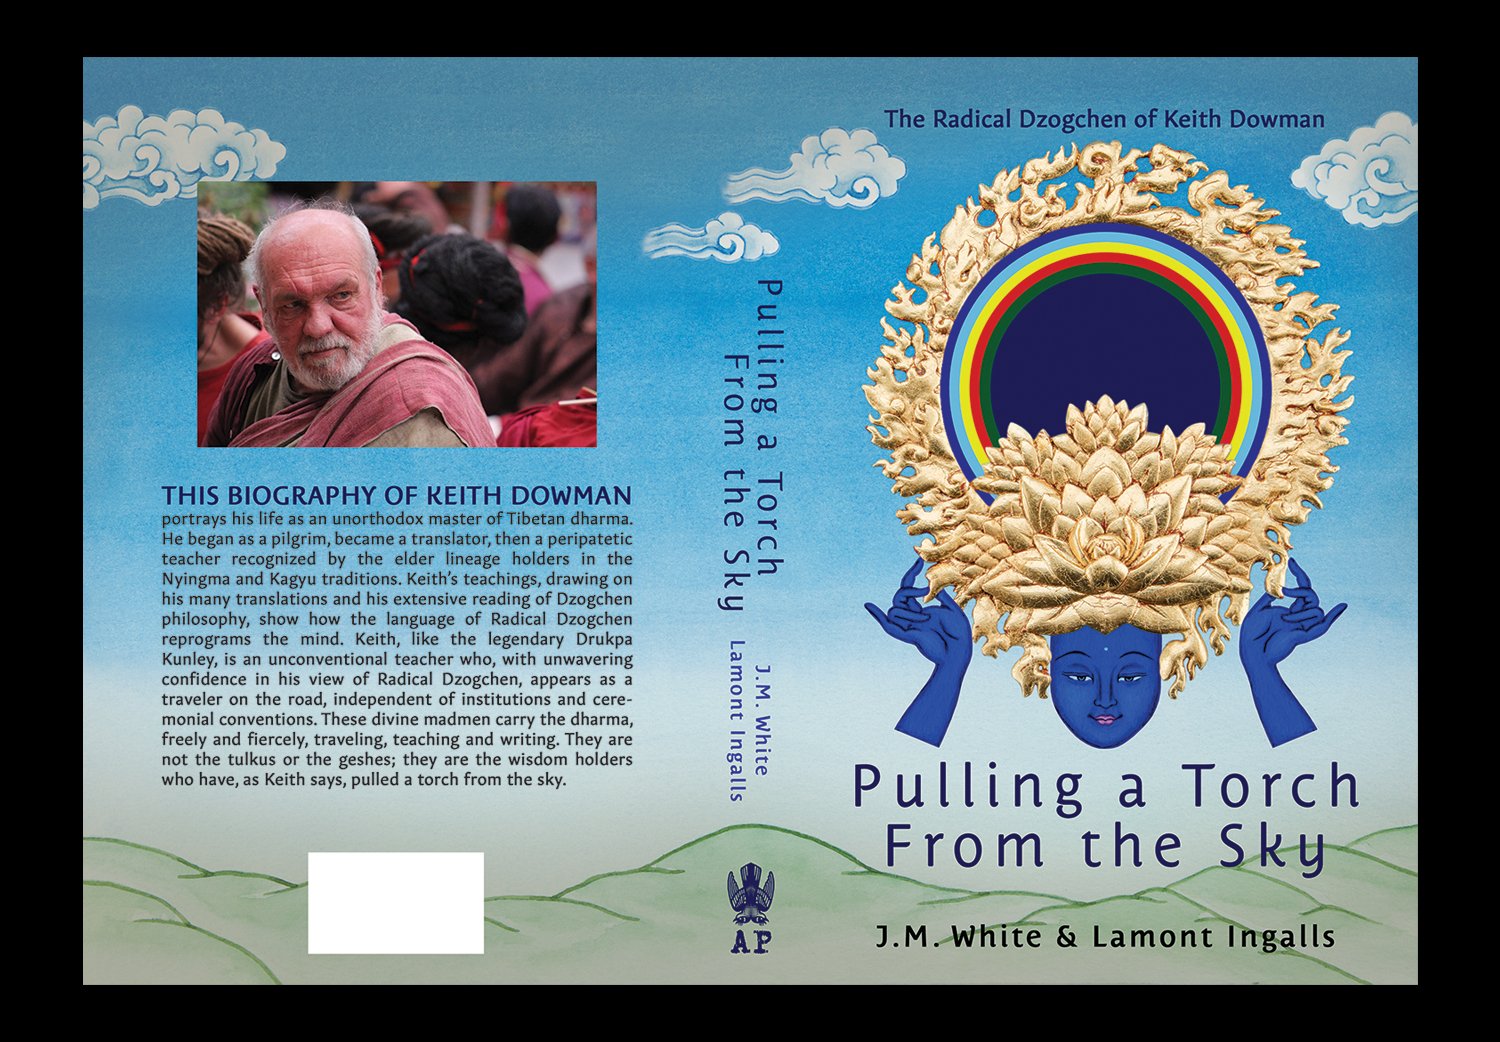   Pulling a Torch From the Sky: The Radical Dzogchen of Keith Dowman , by J.M. White and Lamont Ingalls. Book cover illustration and design. Watercolor, acrylic, resin, gold leaf, digital. 2023. Published by Anomolaic Press. 